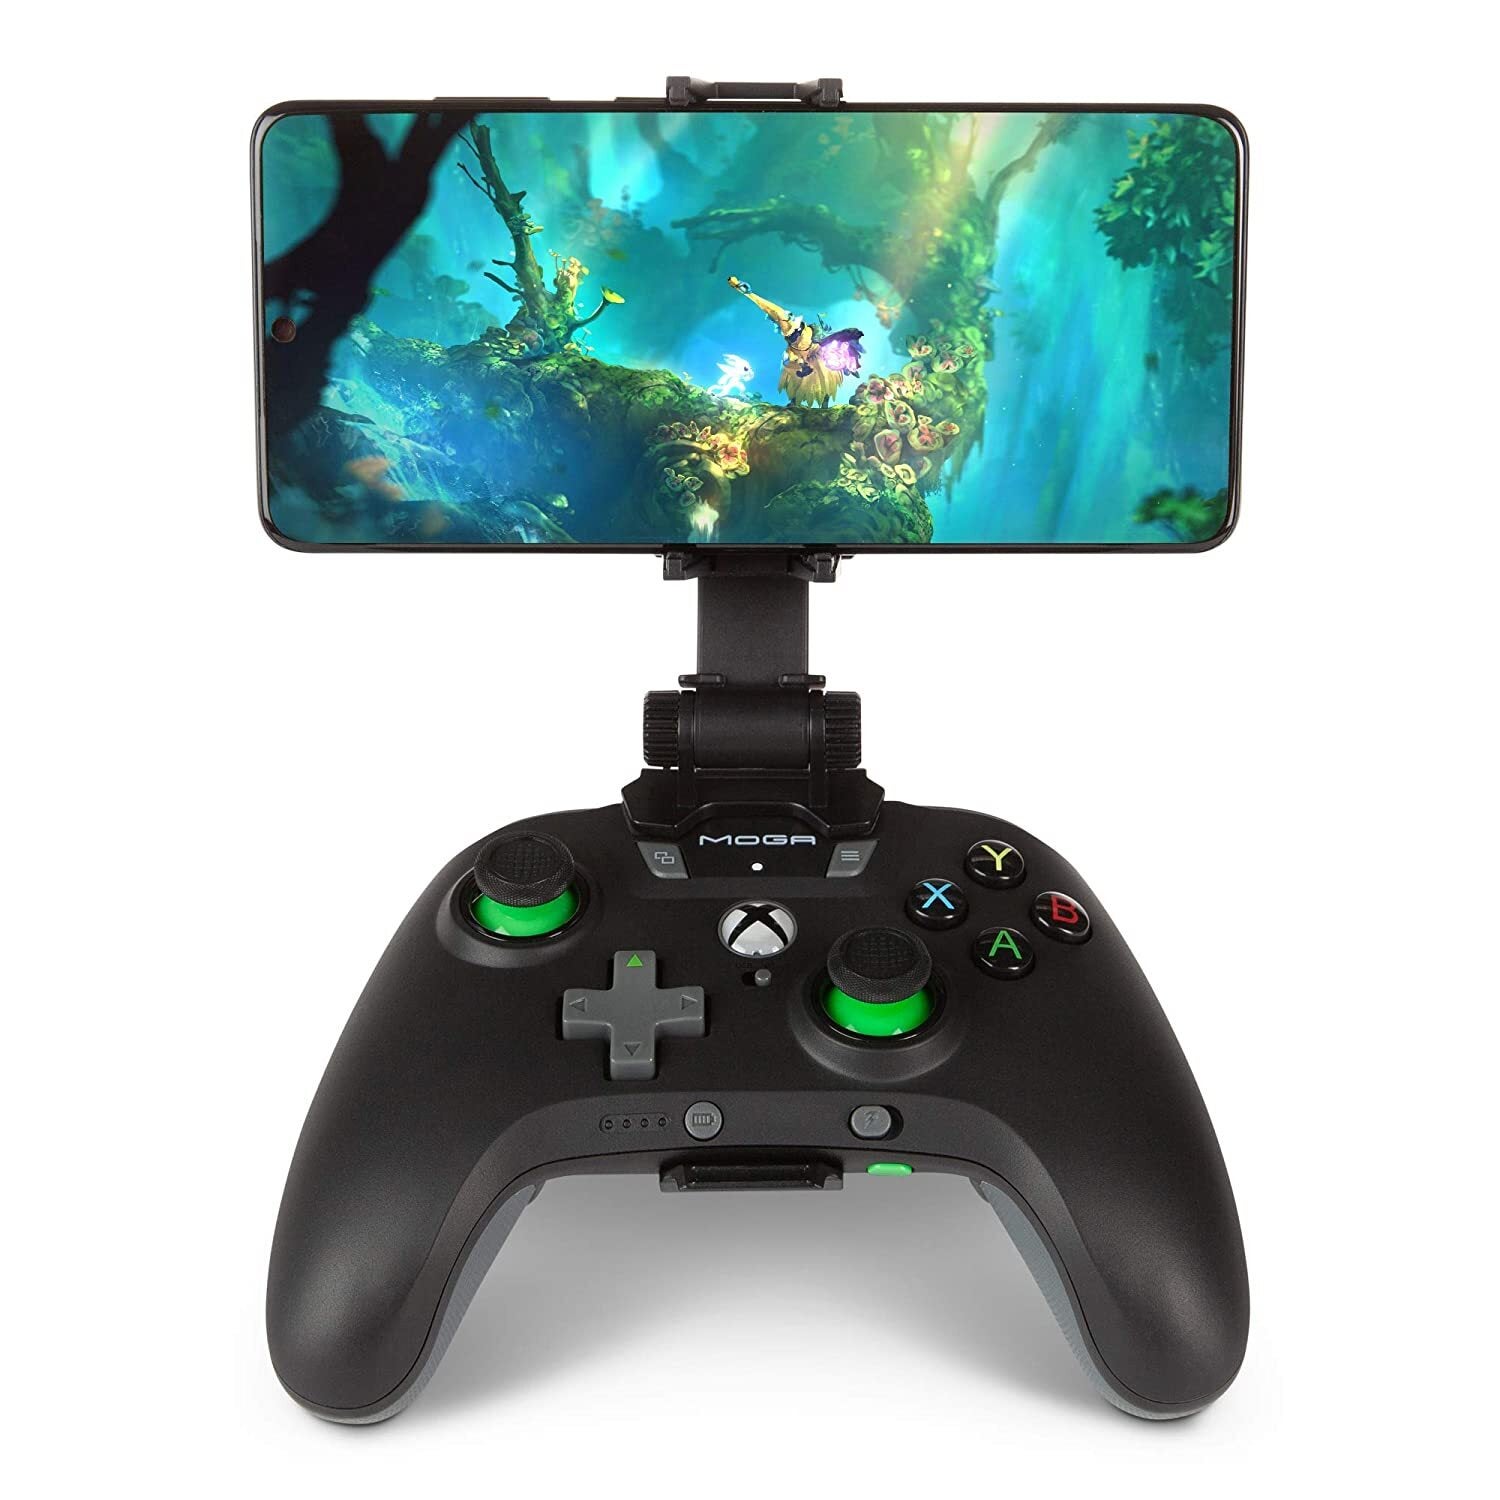 PowerA Moga XP5-X Plus controller. - Best game controllers for iPhone and Android